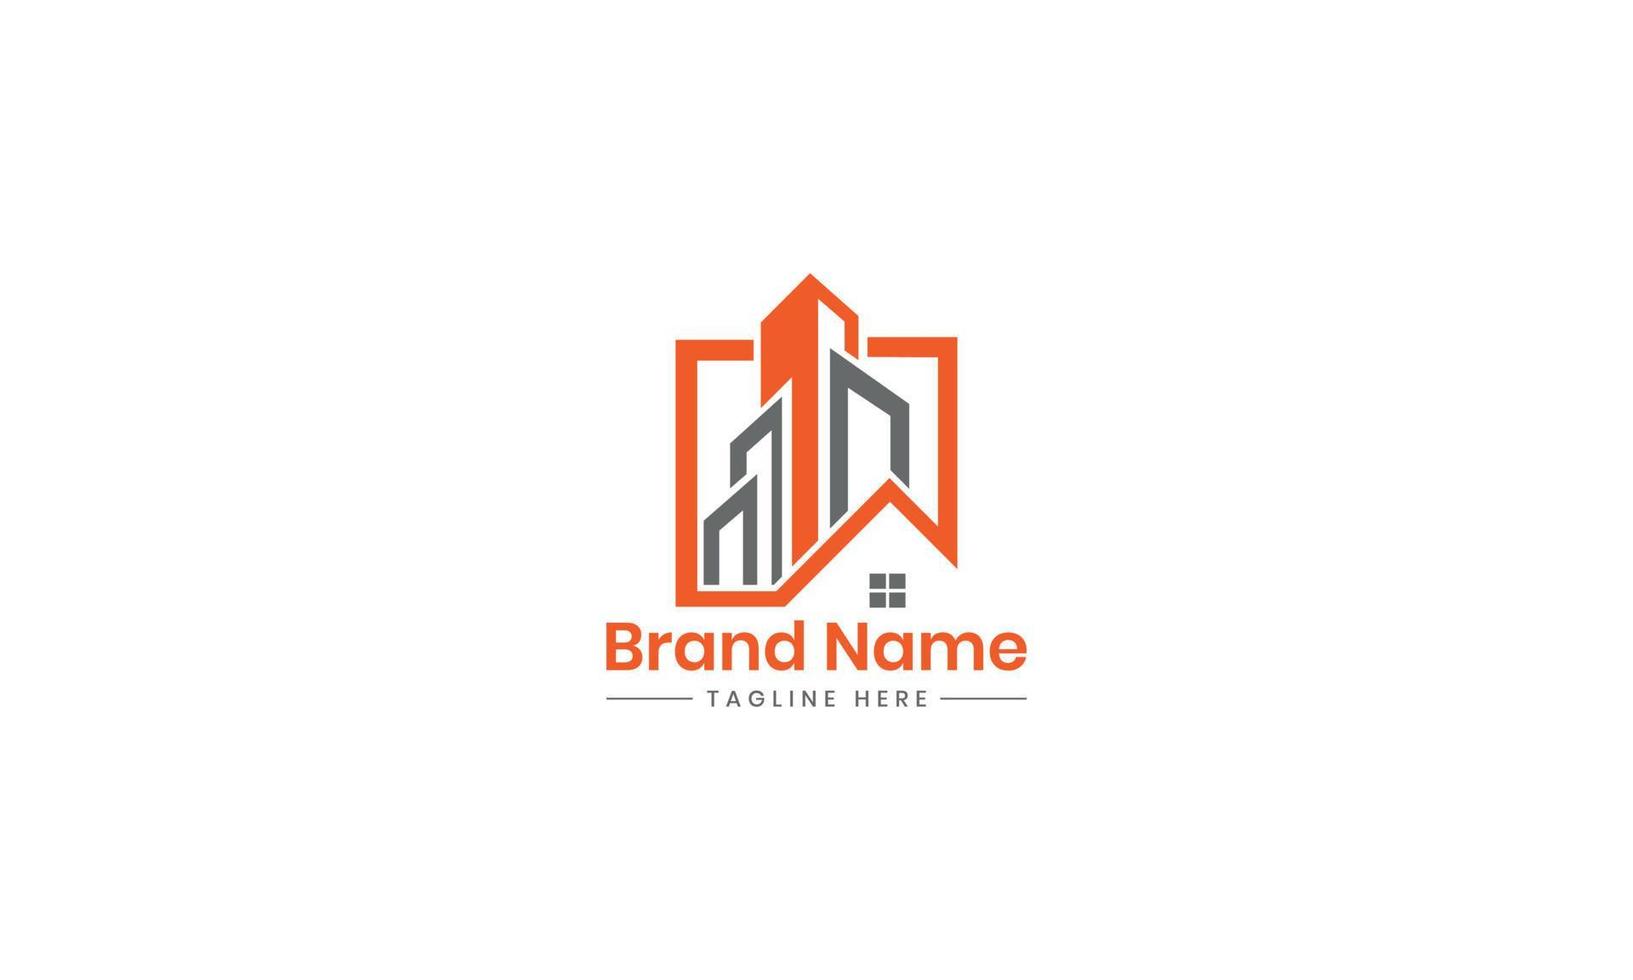 Real Estate, Building and Construction Logo Vector Design. Real Estate Logo Design. House Logo Design Pro Vector